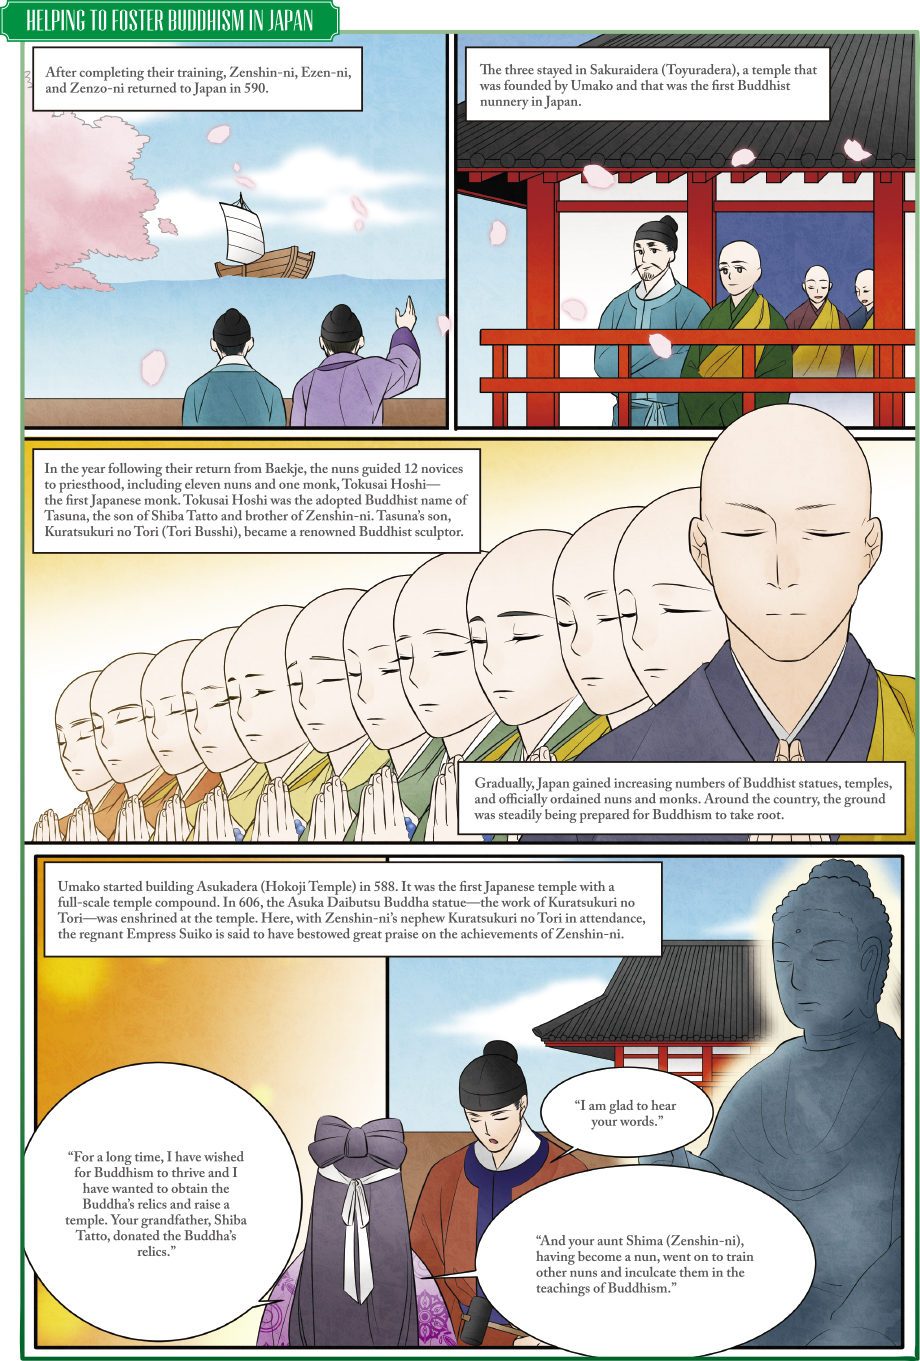 Helping to foster Buddhism in Japan